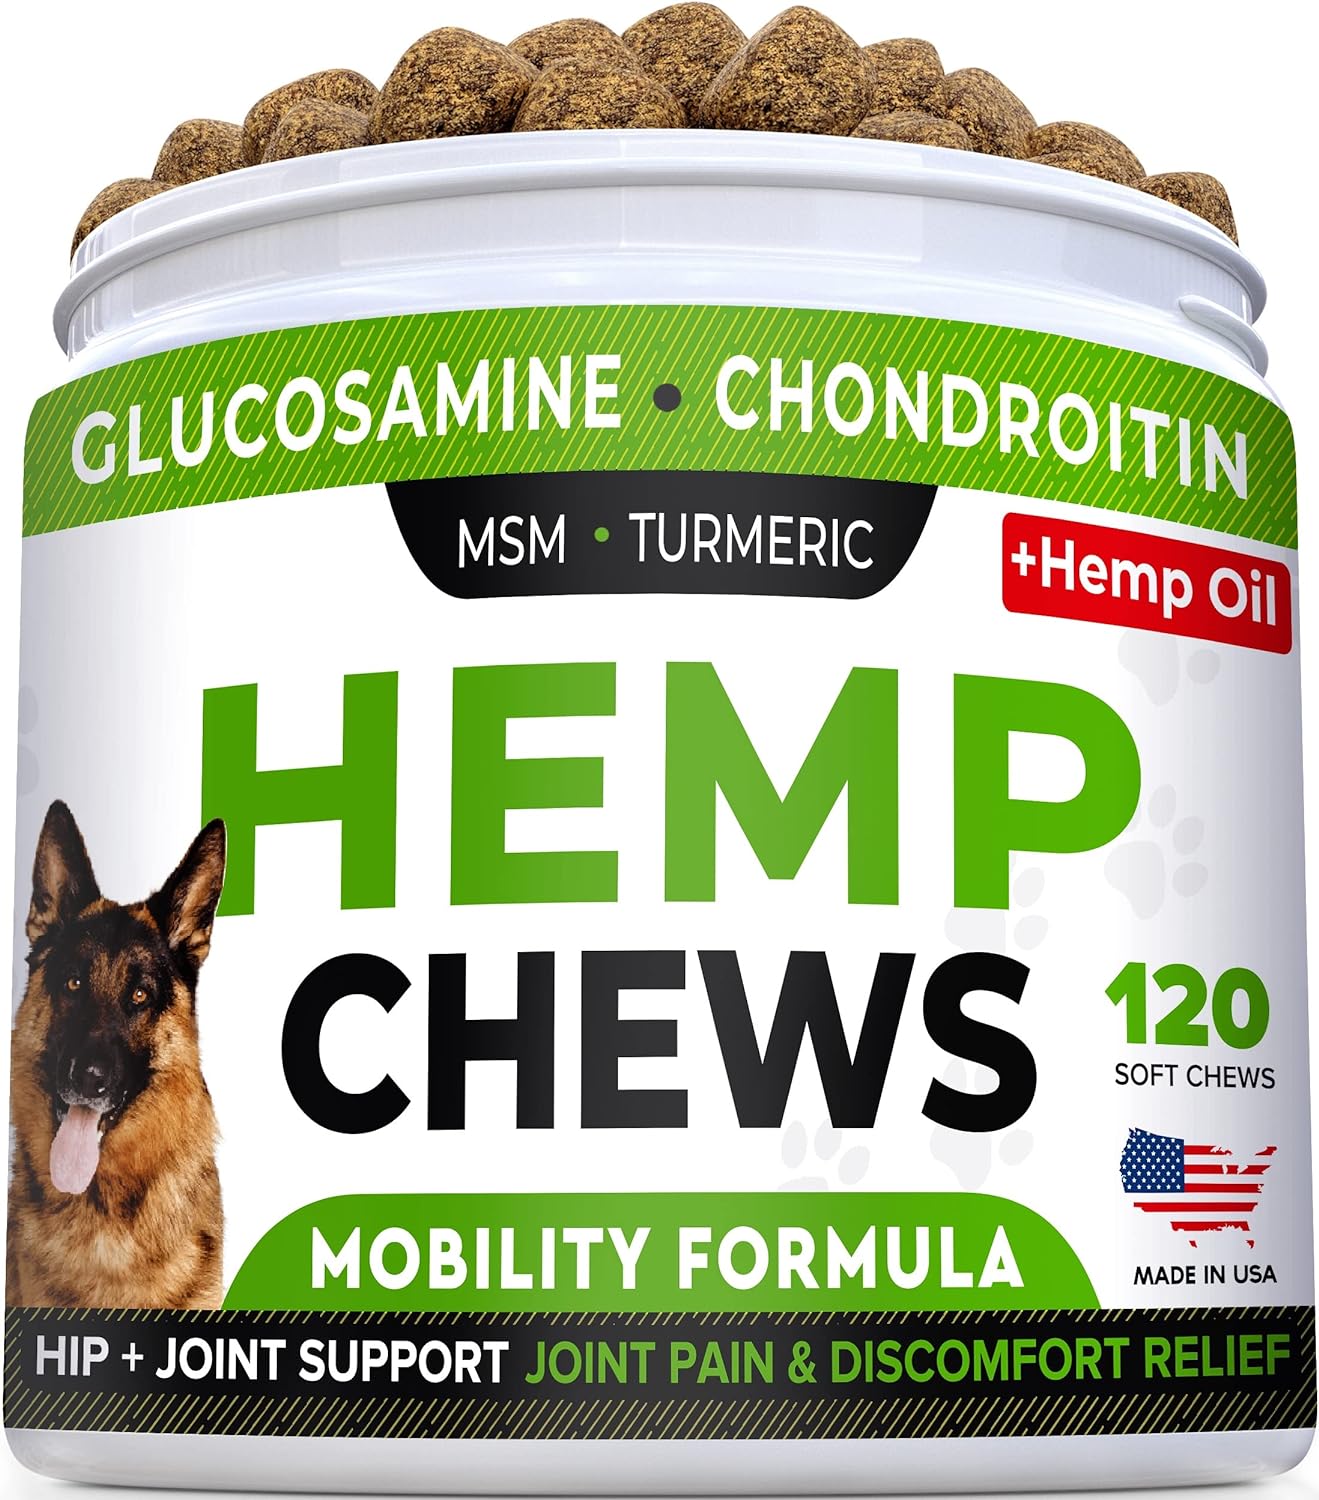 STRELLALAB Hemp Treats + Glucosamine for Dogs - Hip & Joint Supplement - w/Hemp Oil + Protein - Chondroitin, MSM, Turmeric to Improve Mobility & Energy - Natural Joint Pain Relief, 120 Chews